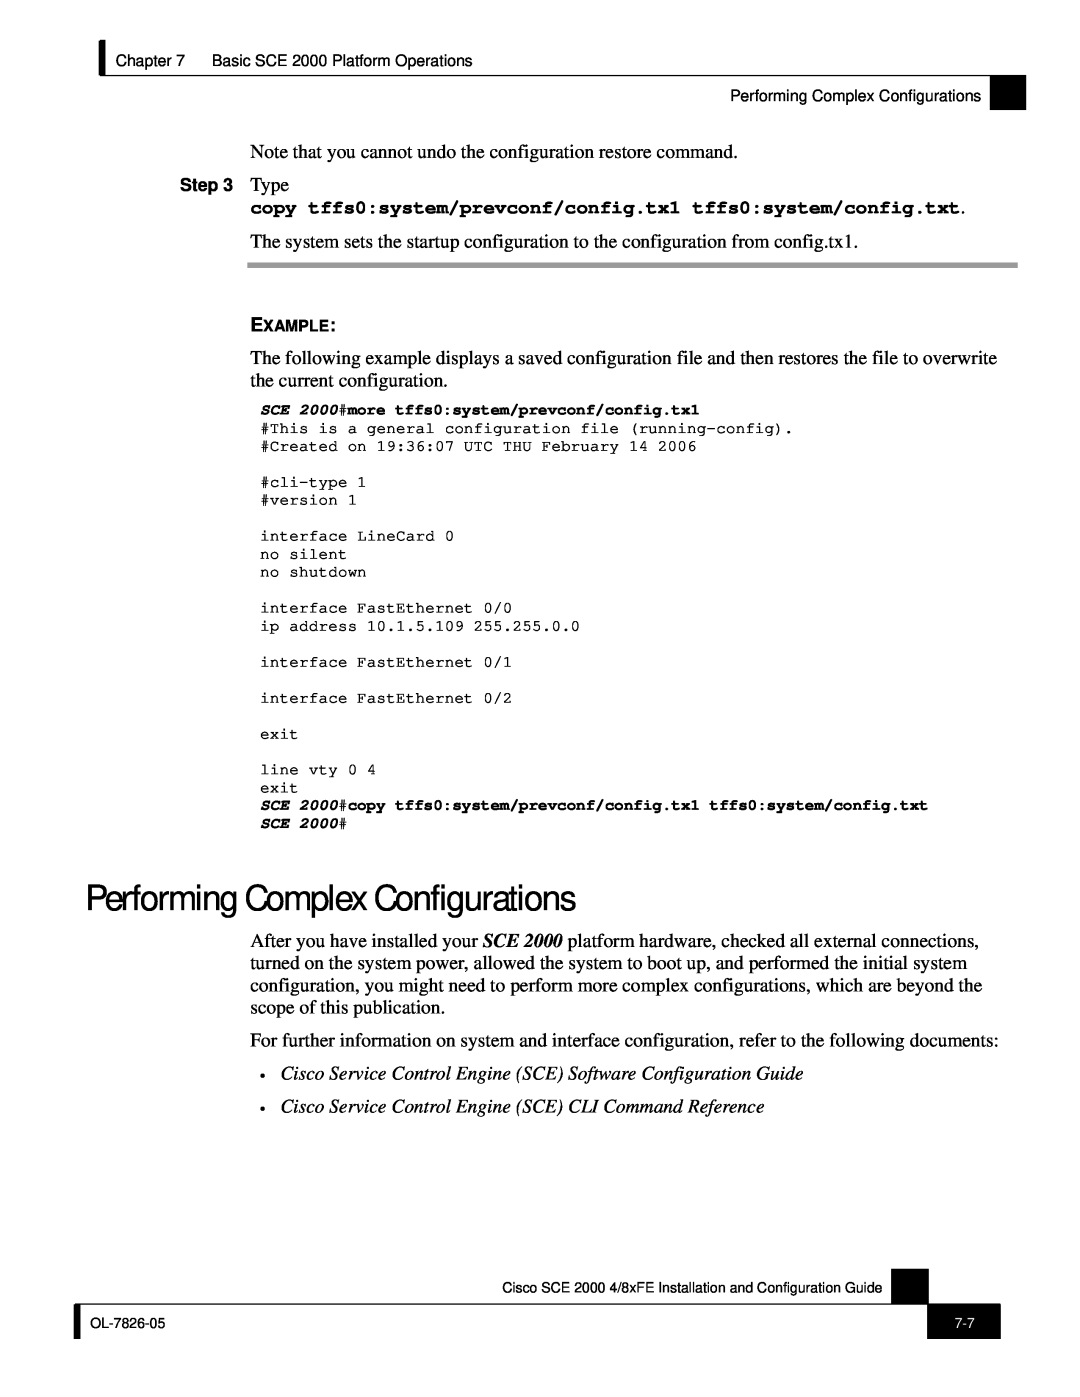 Cisco Systems SCE 2000 4/8xFE Performing Complex Configurations, Cisco Service Control Engine SCE CLI Command Reference 